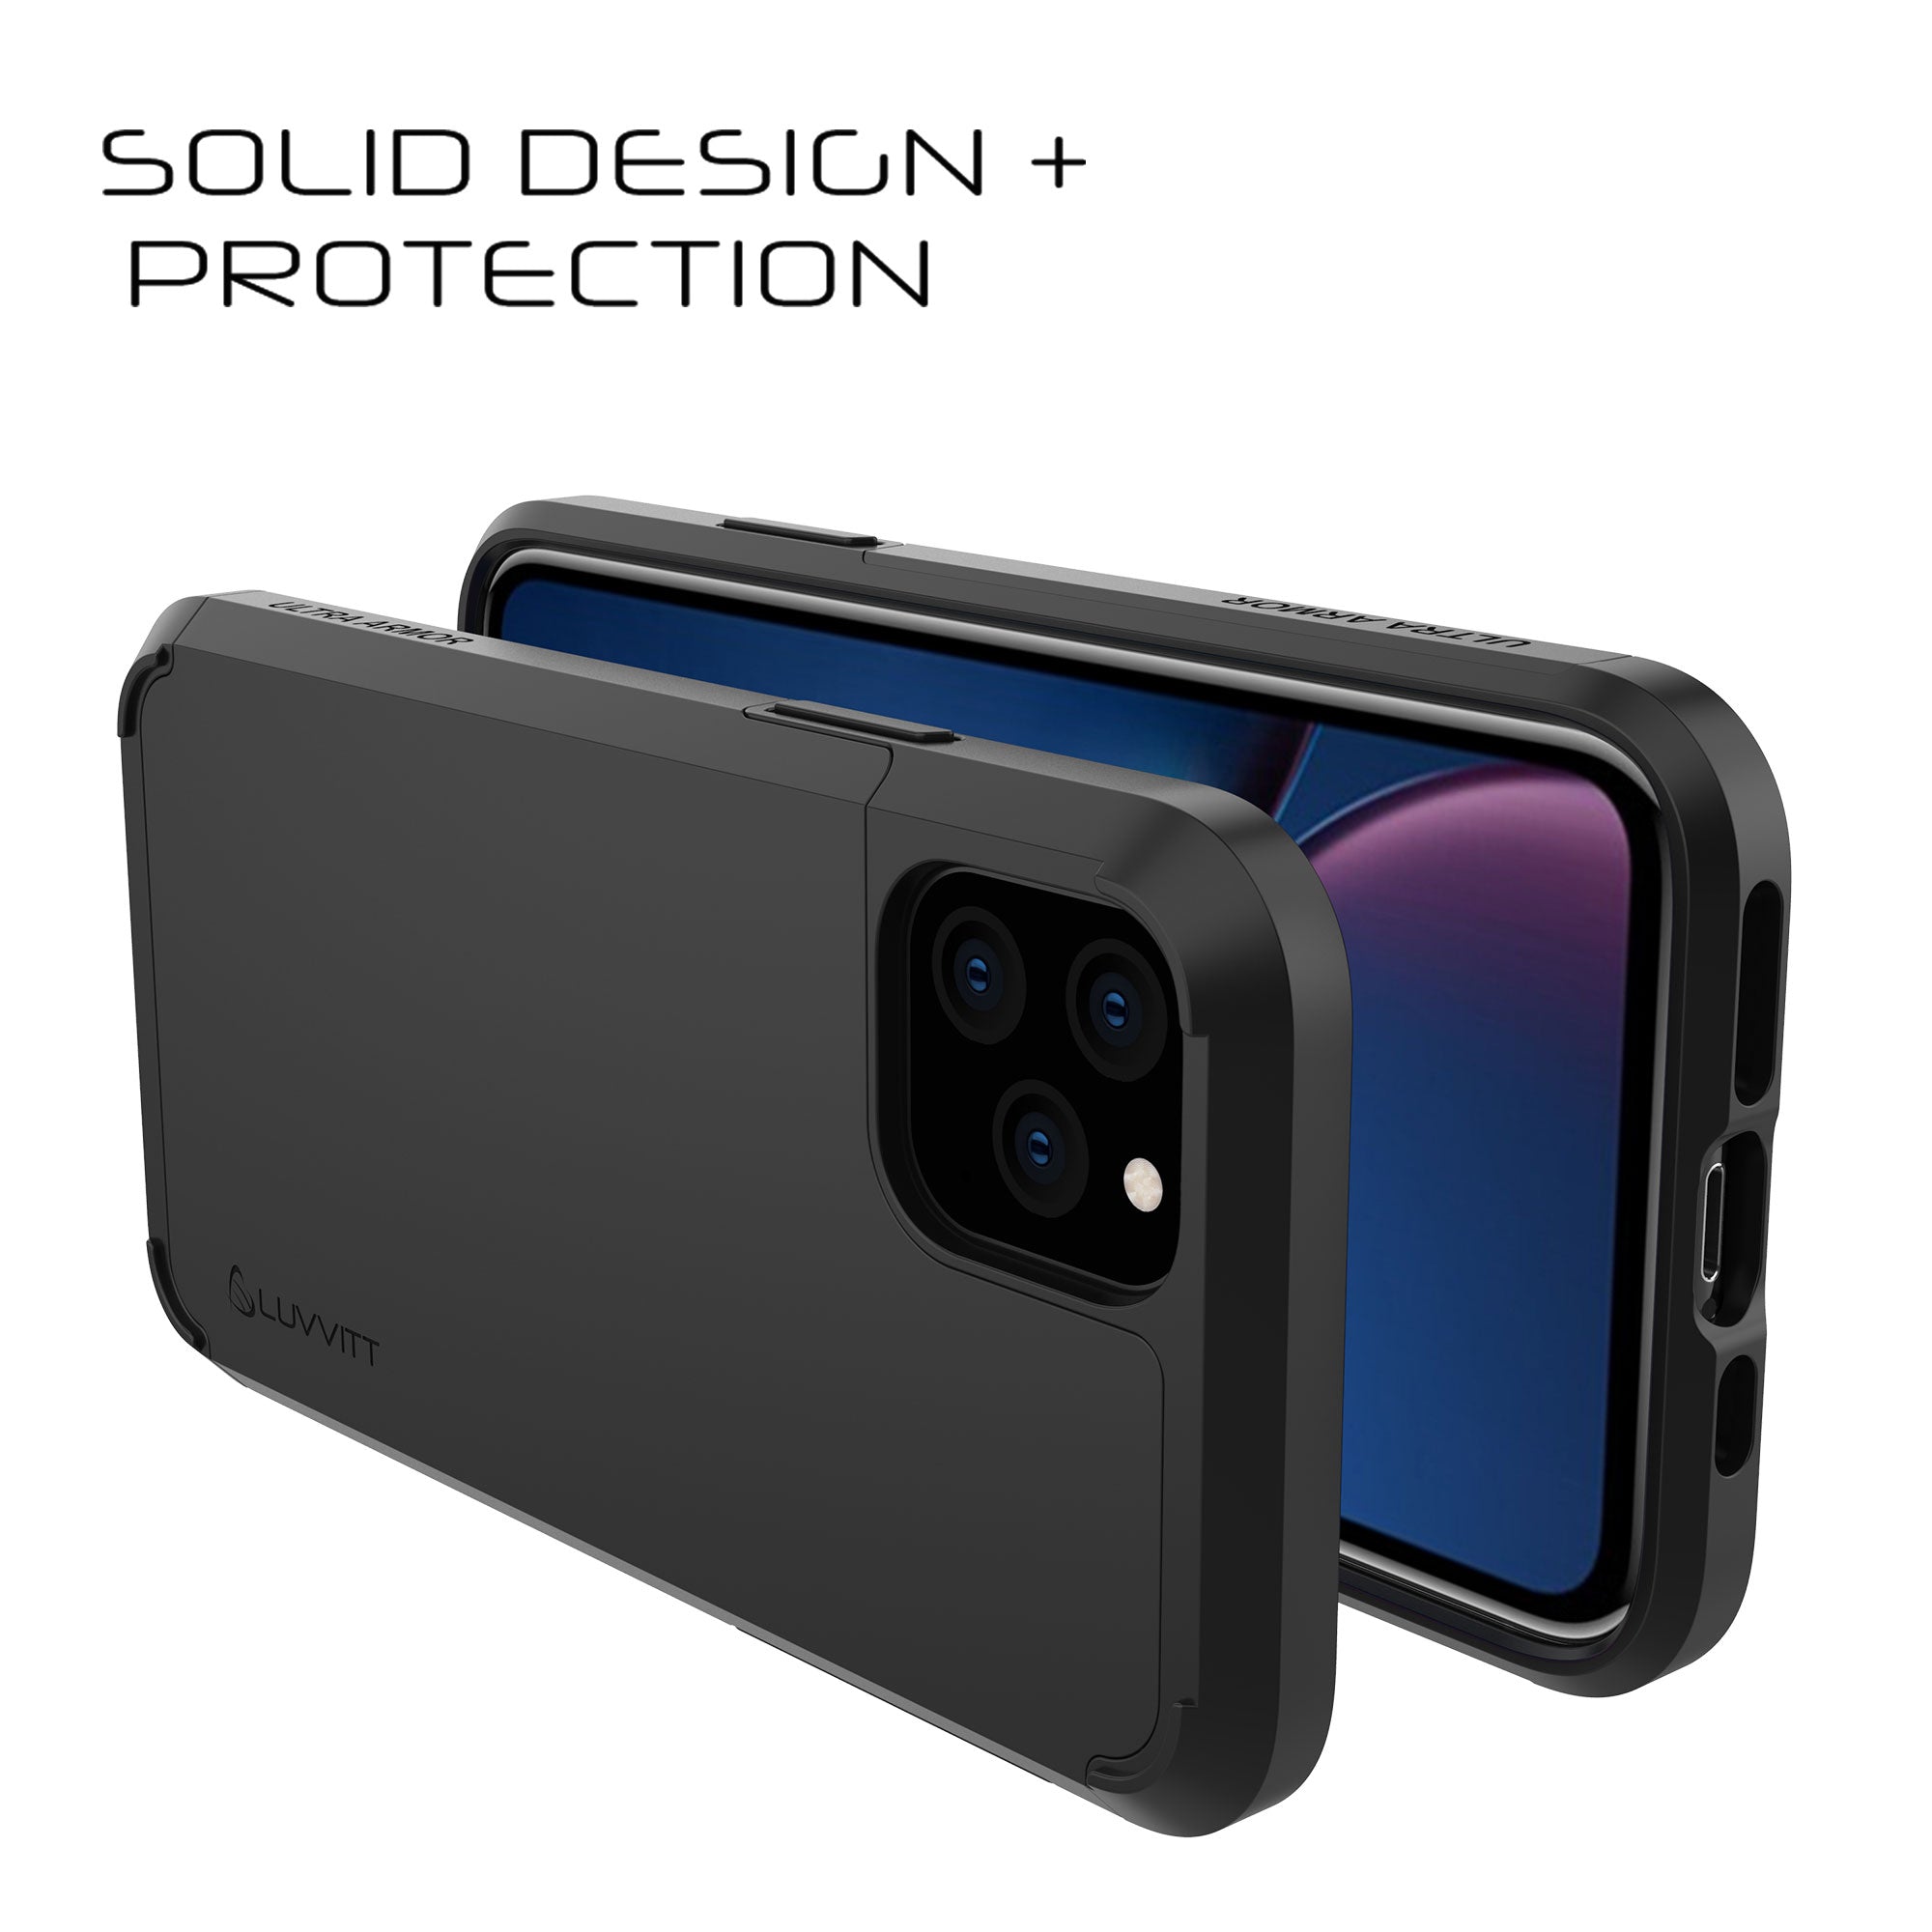 Luvvitt Ultra Armor Case and Tempered Glass Screen Protector Bundle for iPhone 11 Pro Max 2019 - Black